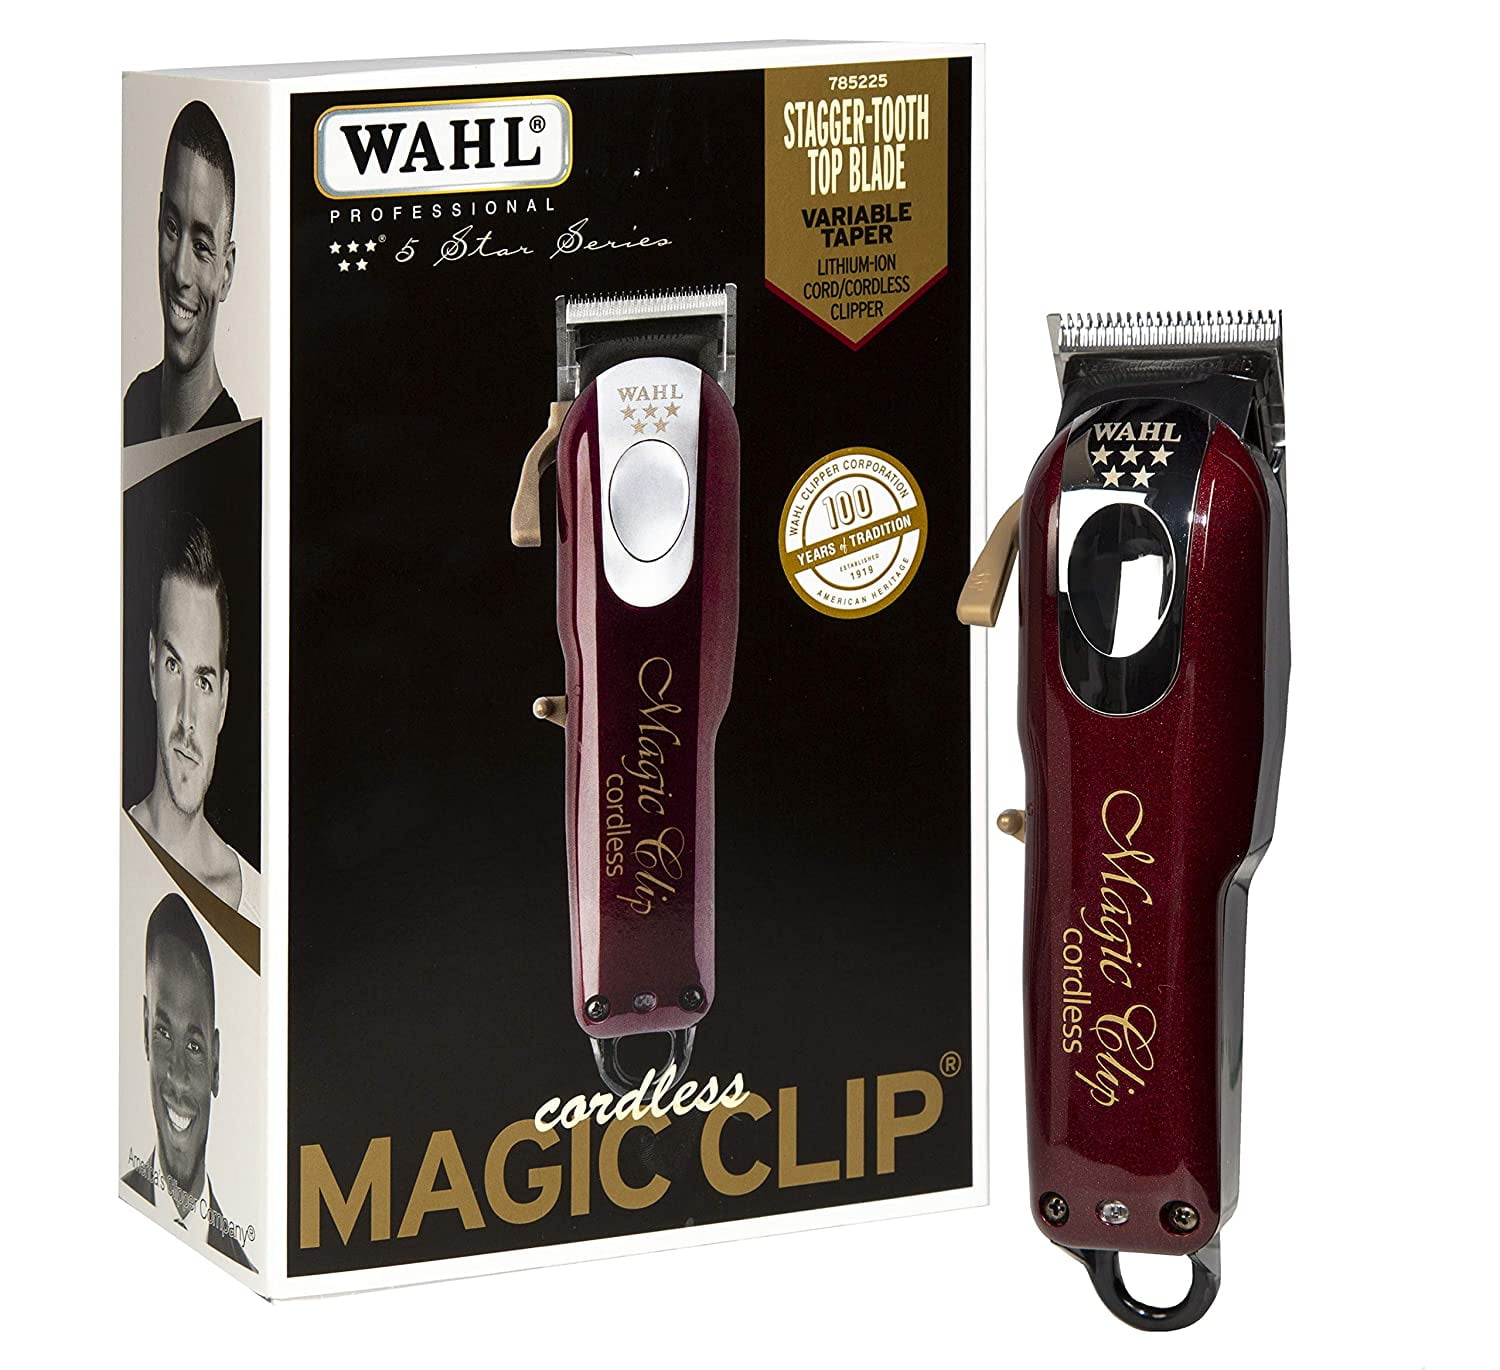 Korrespondent Senatet tobak Wahl Professional 5 Star Magic Clip Cord Cordless Hair Clipper for Barbers  and Stylists, 6.25 Inch, red, 1 Count - Walmart.com